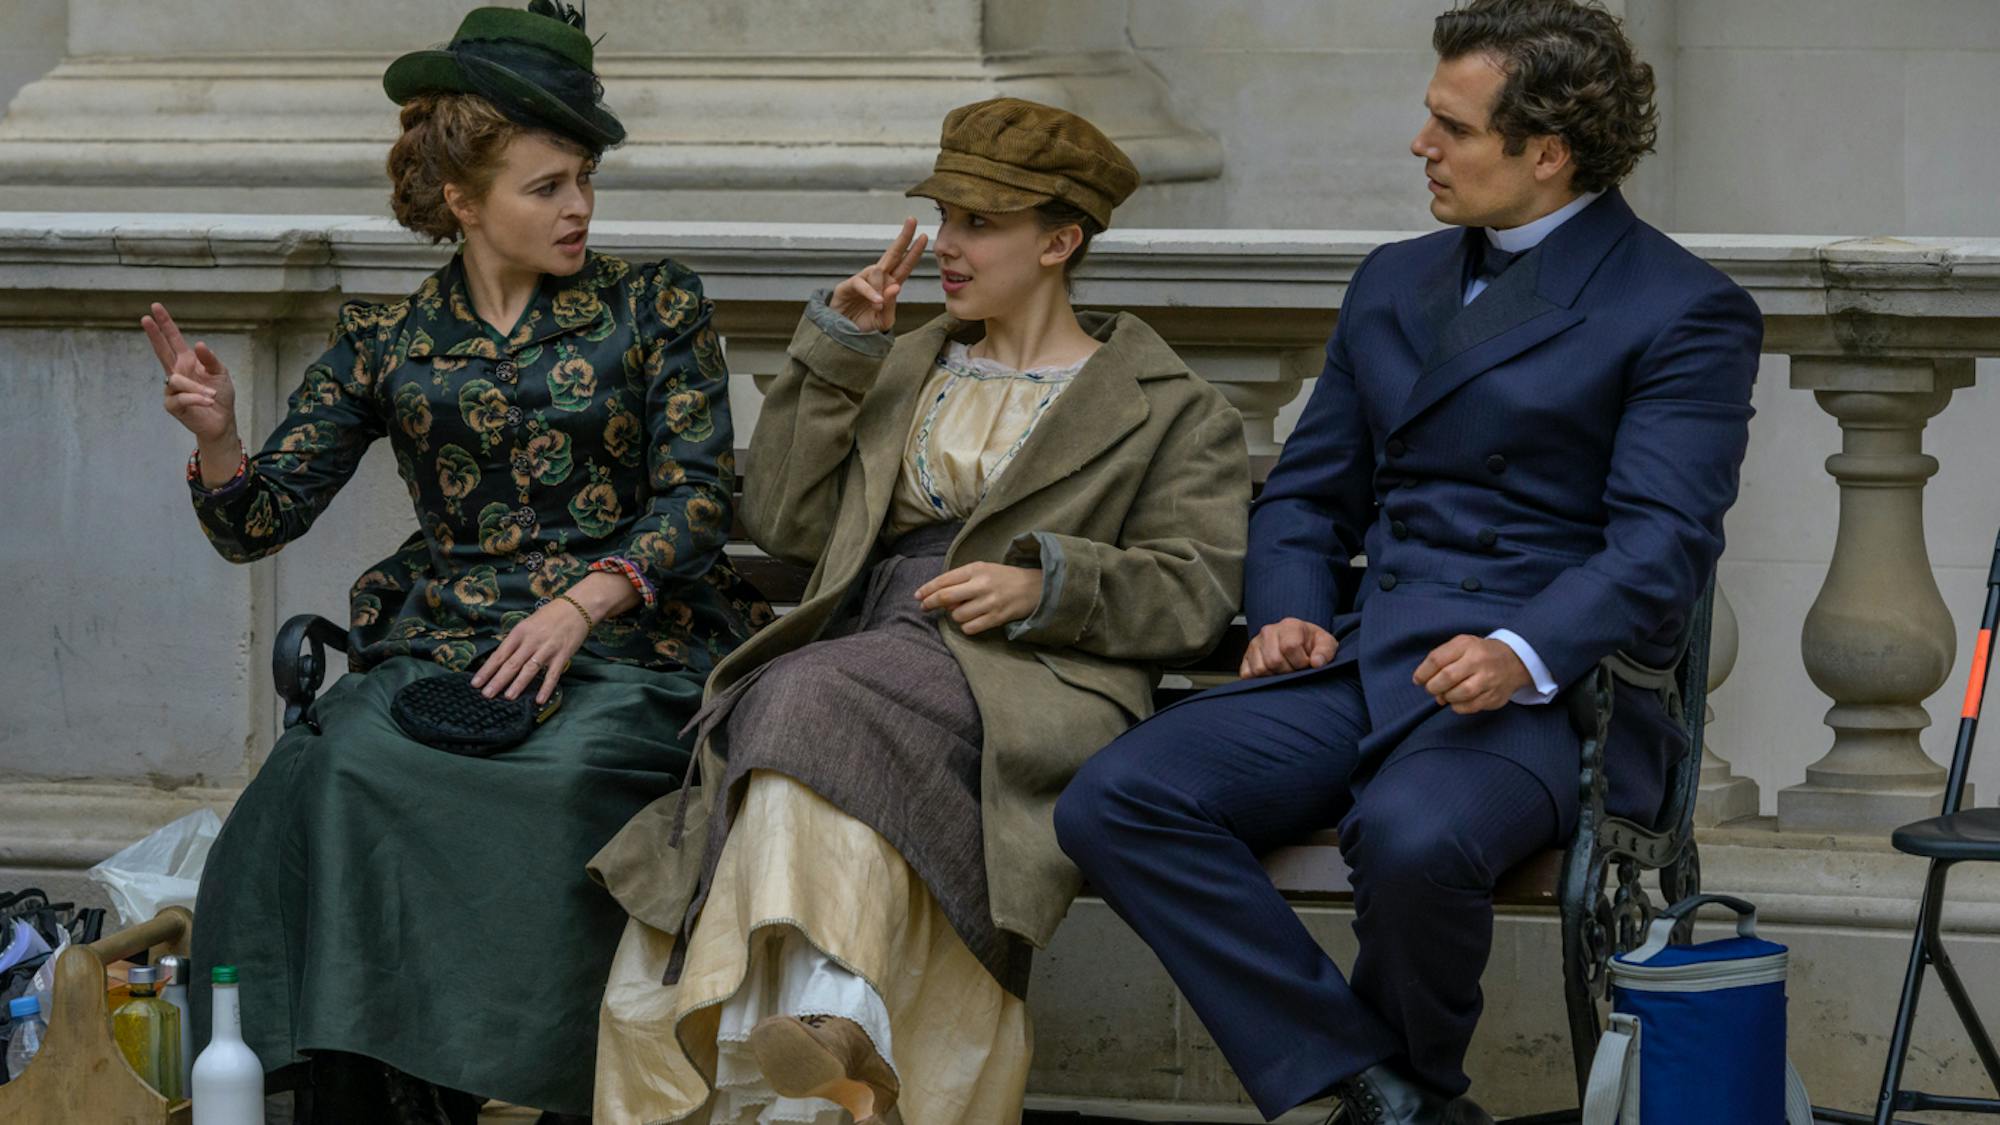 Helena Bonham Carter, Millie Bobby Brown, and Henry Cavill in between takes